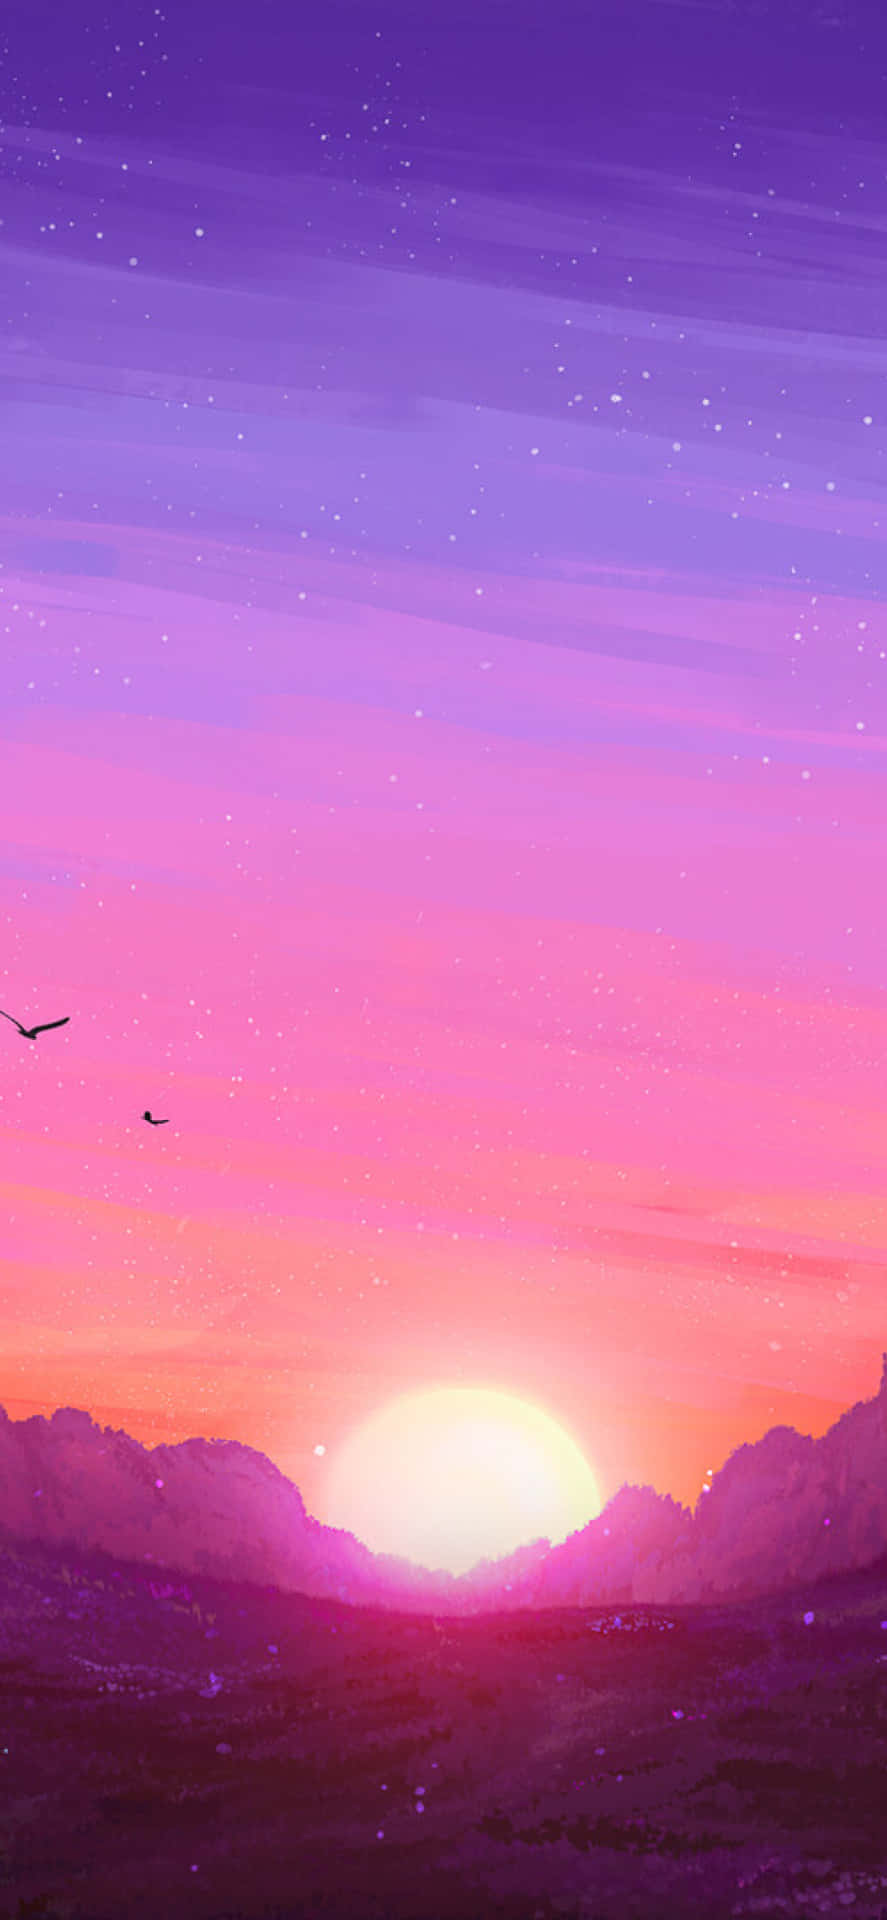 Take in the beauty of sunset with Apple's latest iPhone Wallpaper